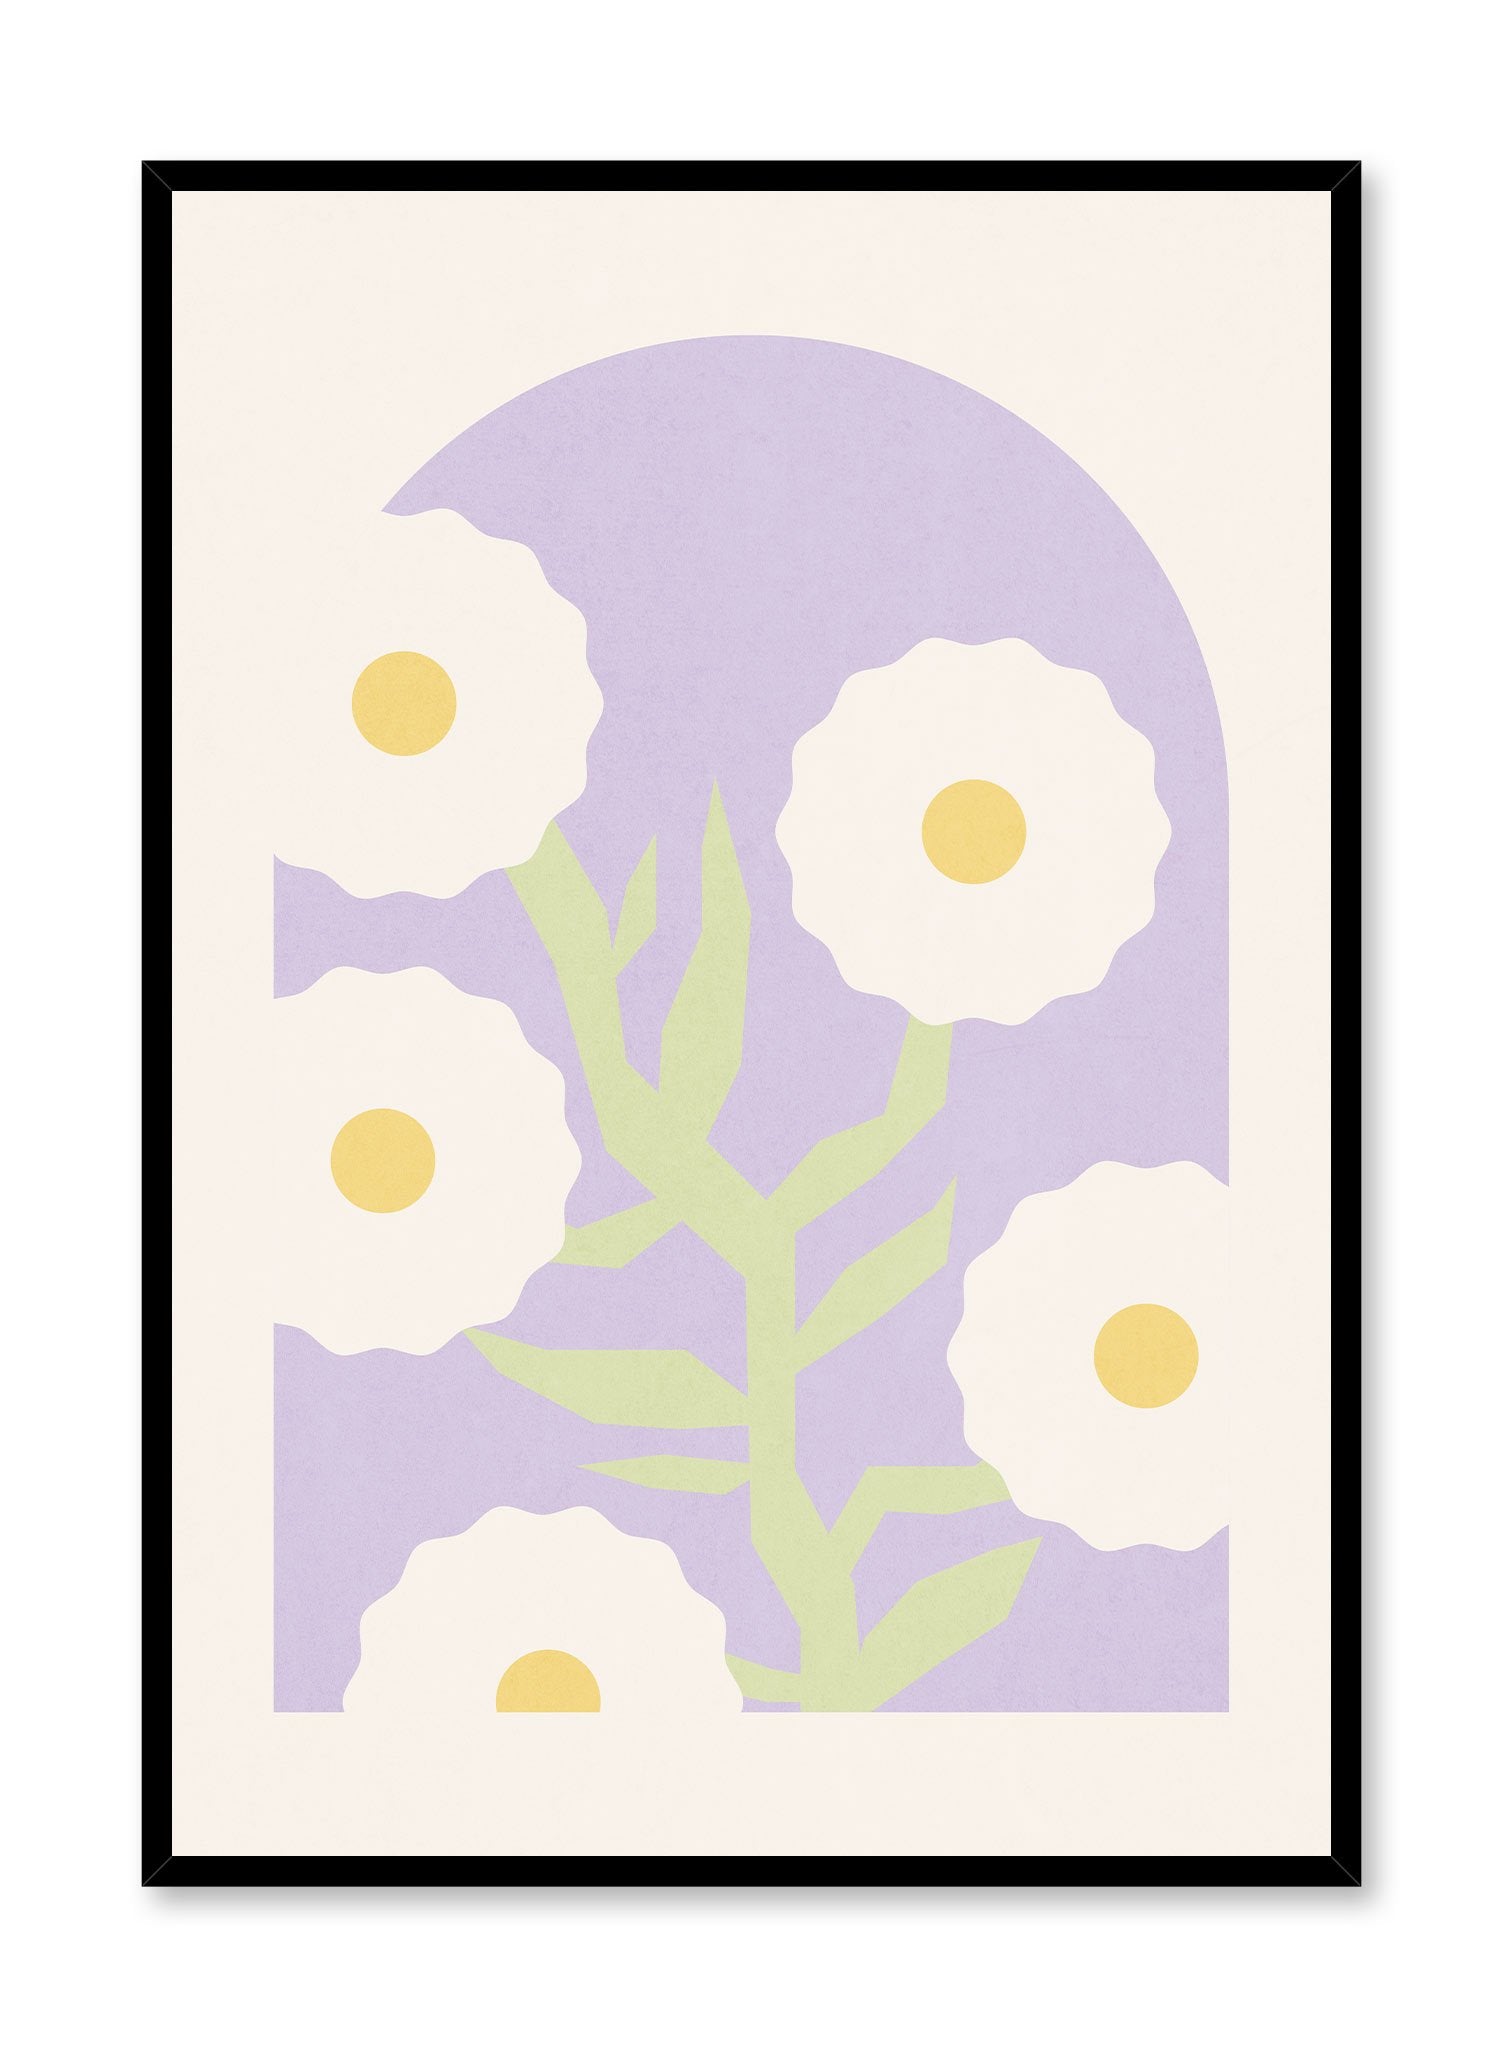 Cheery Blooms is a vector illustration of five tripod flowers facing the observer like bright film lights by Opposite Wall.